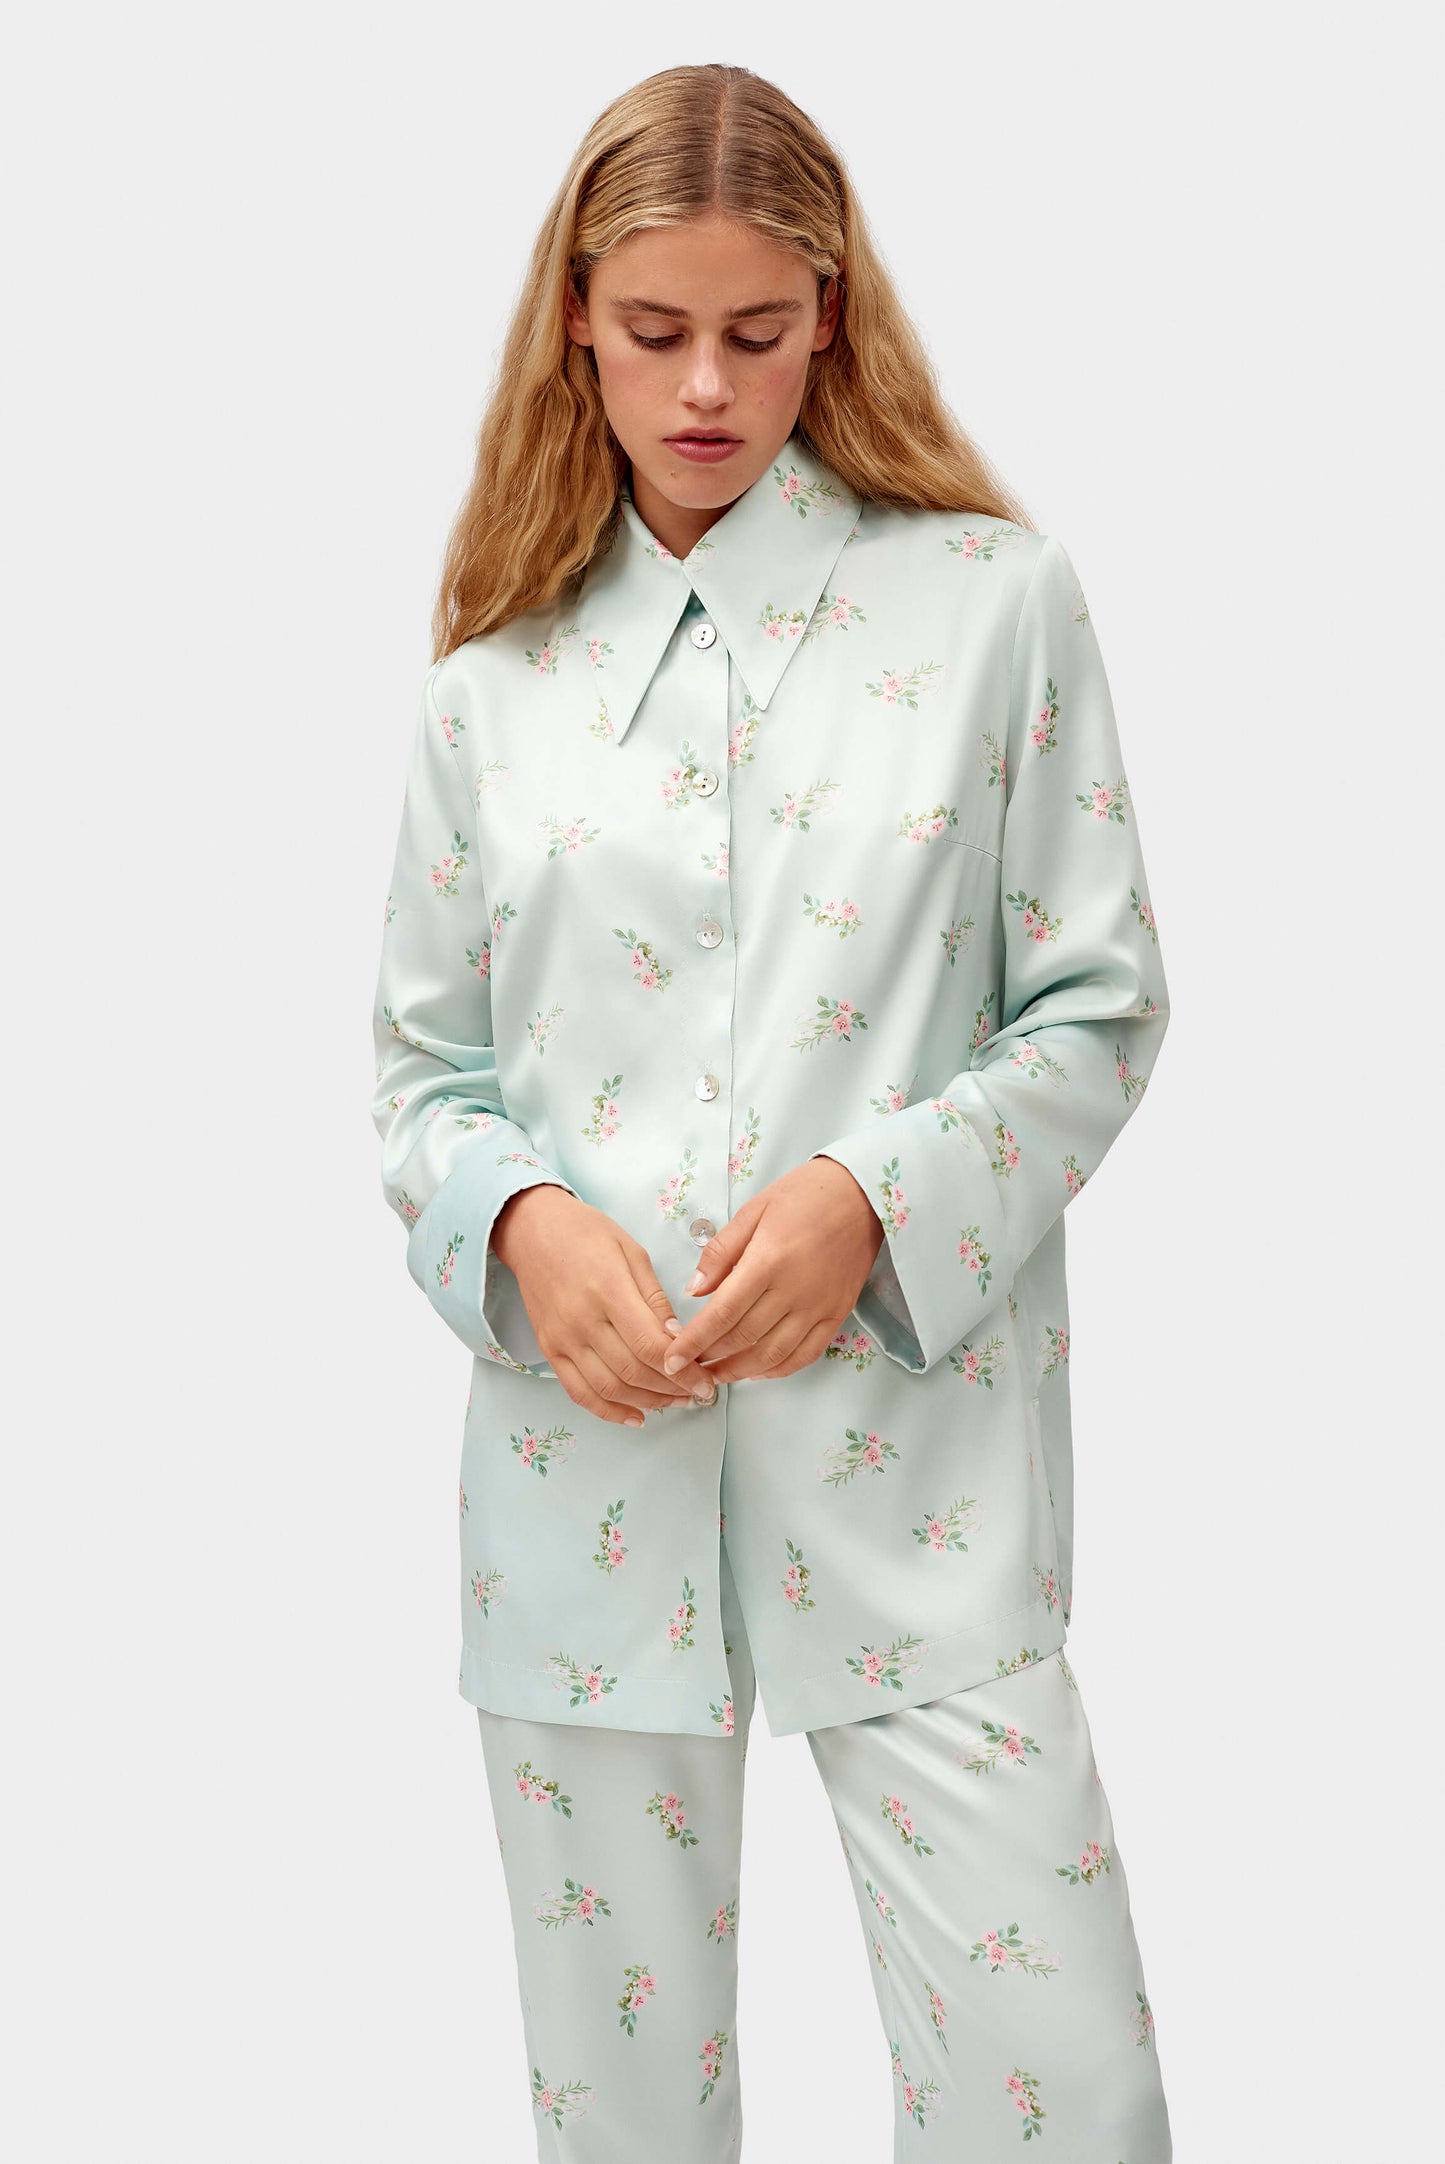 Blossom Printed Shirt in Mint